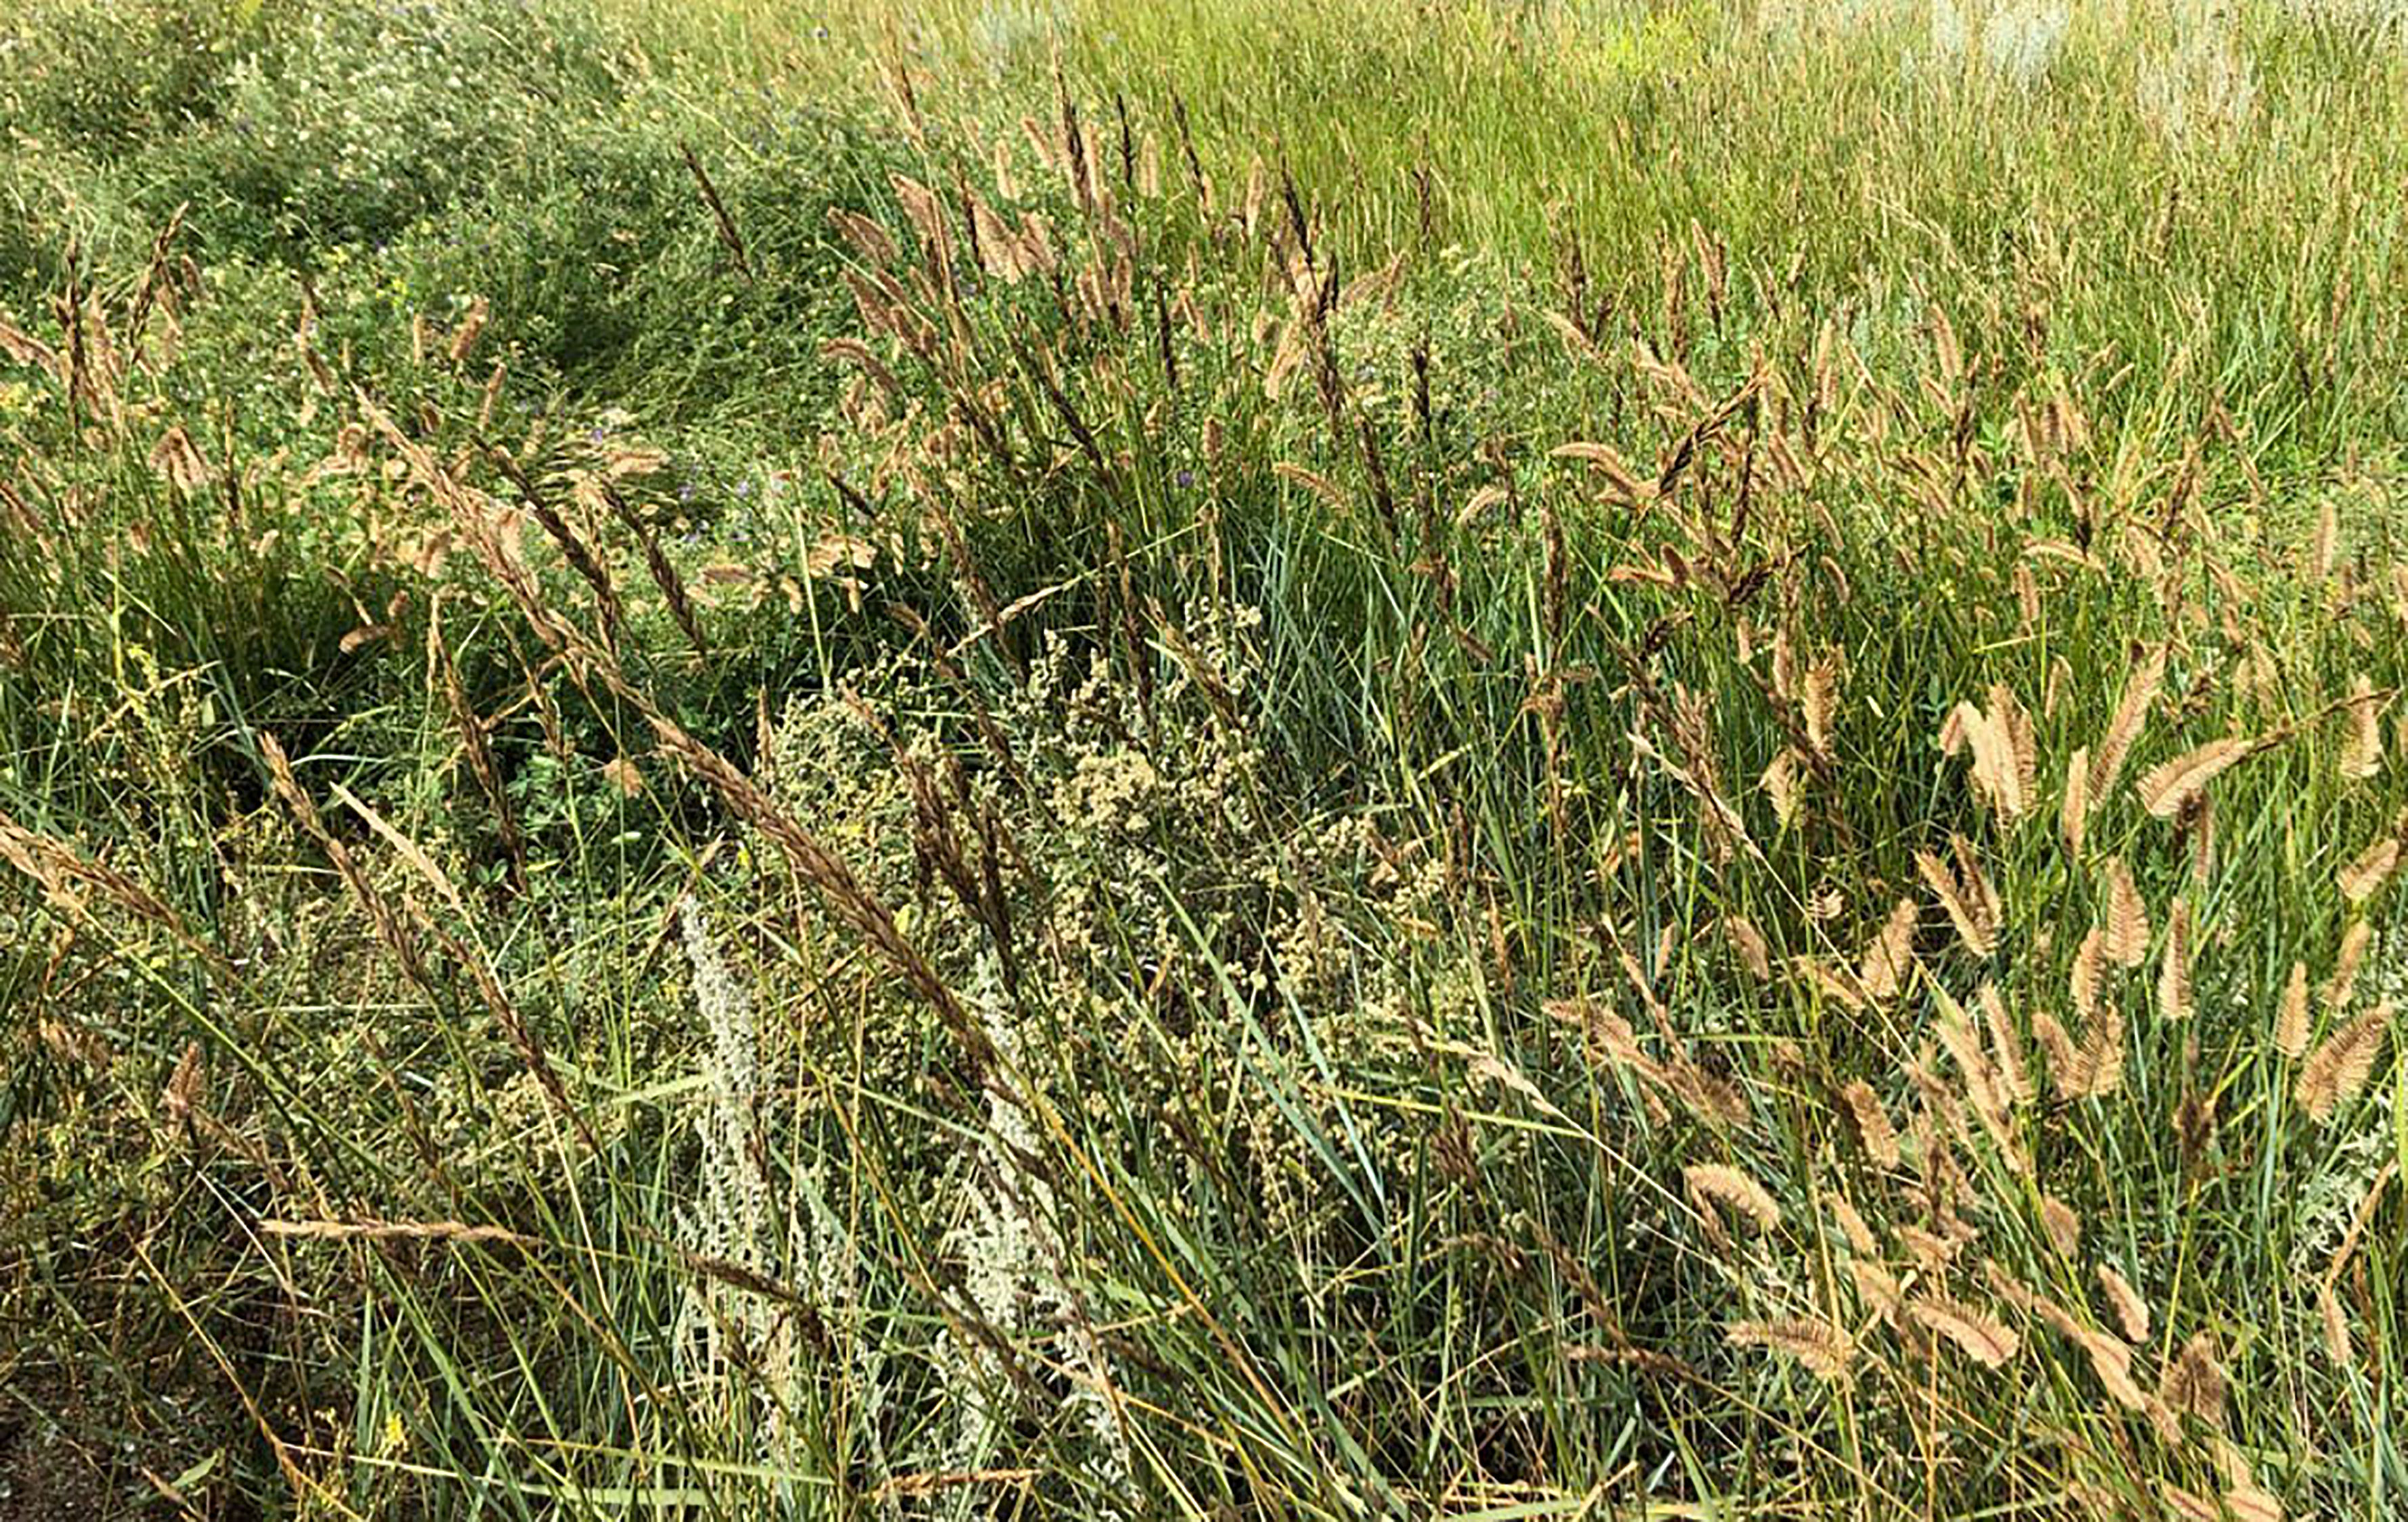 A patch of western wheatgrass with ergot fungus growing throughout.